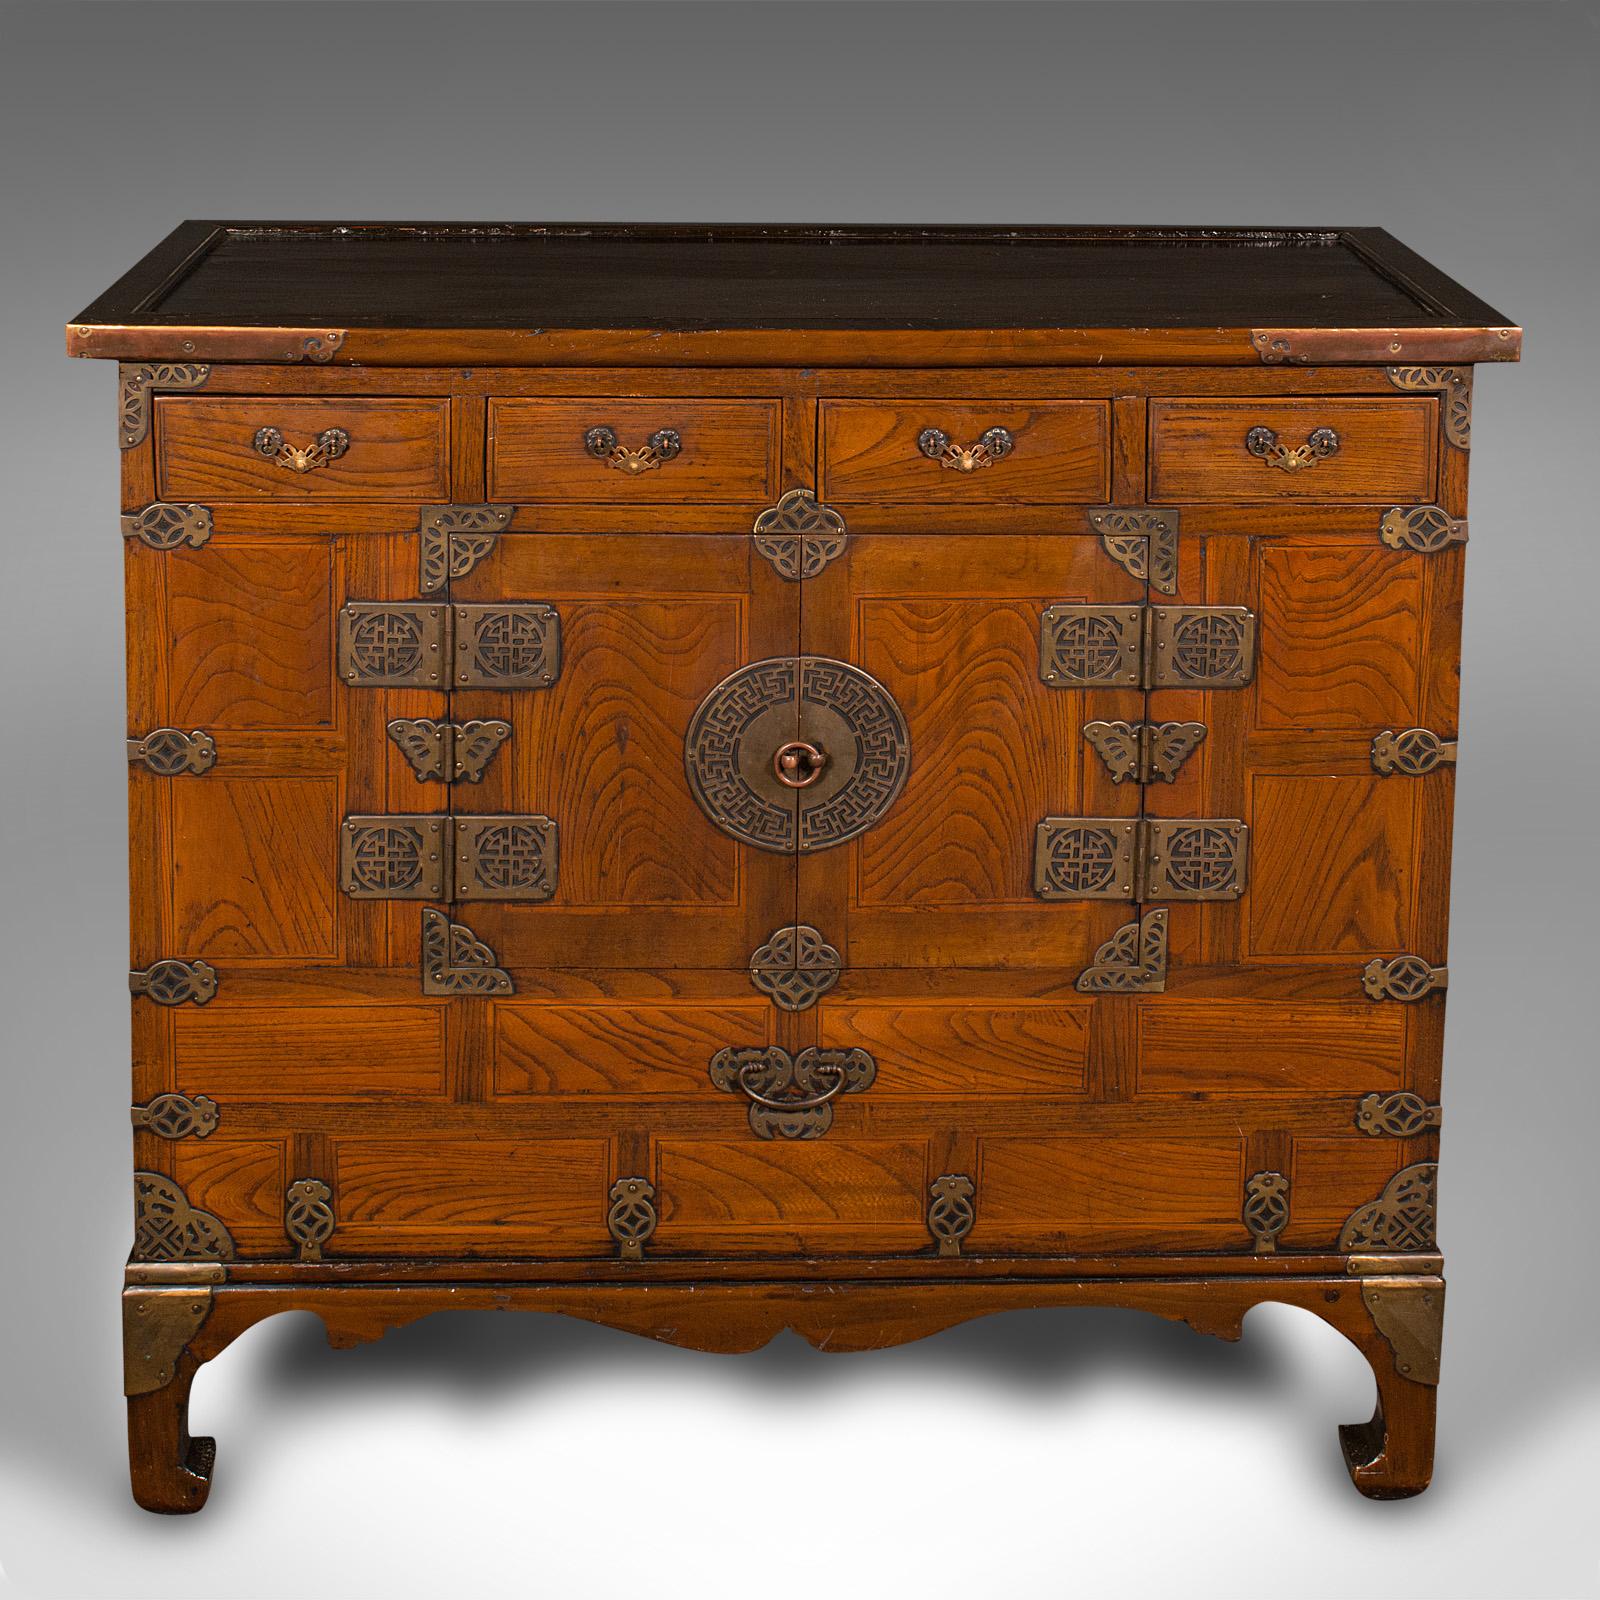 This is an antique raised chest. A Korean, elm and pear wood side cabinet with brass fittings, dating to the late Victorian period, circa 1880.

Superb Korean craftsmanship with delightful brass tones
Displaying a desirable aged patina and in good